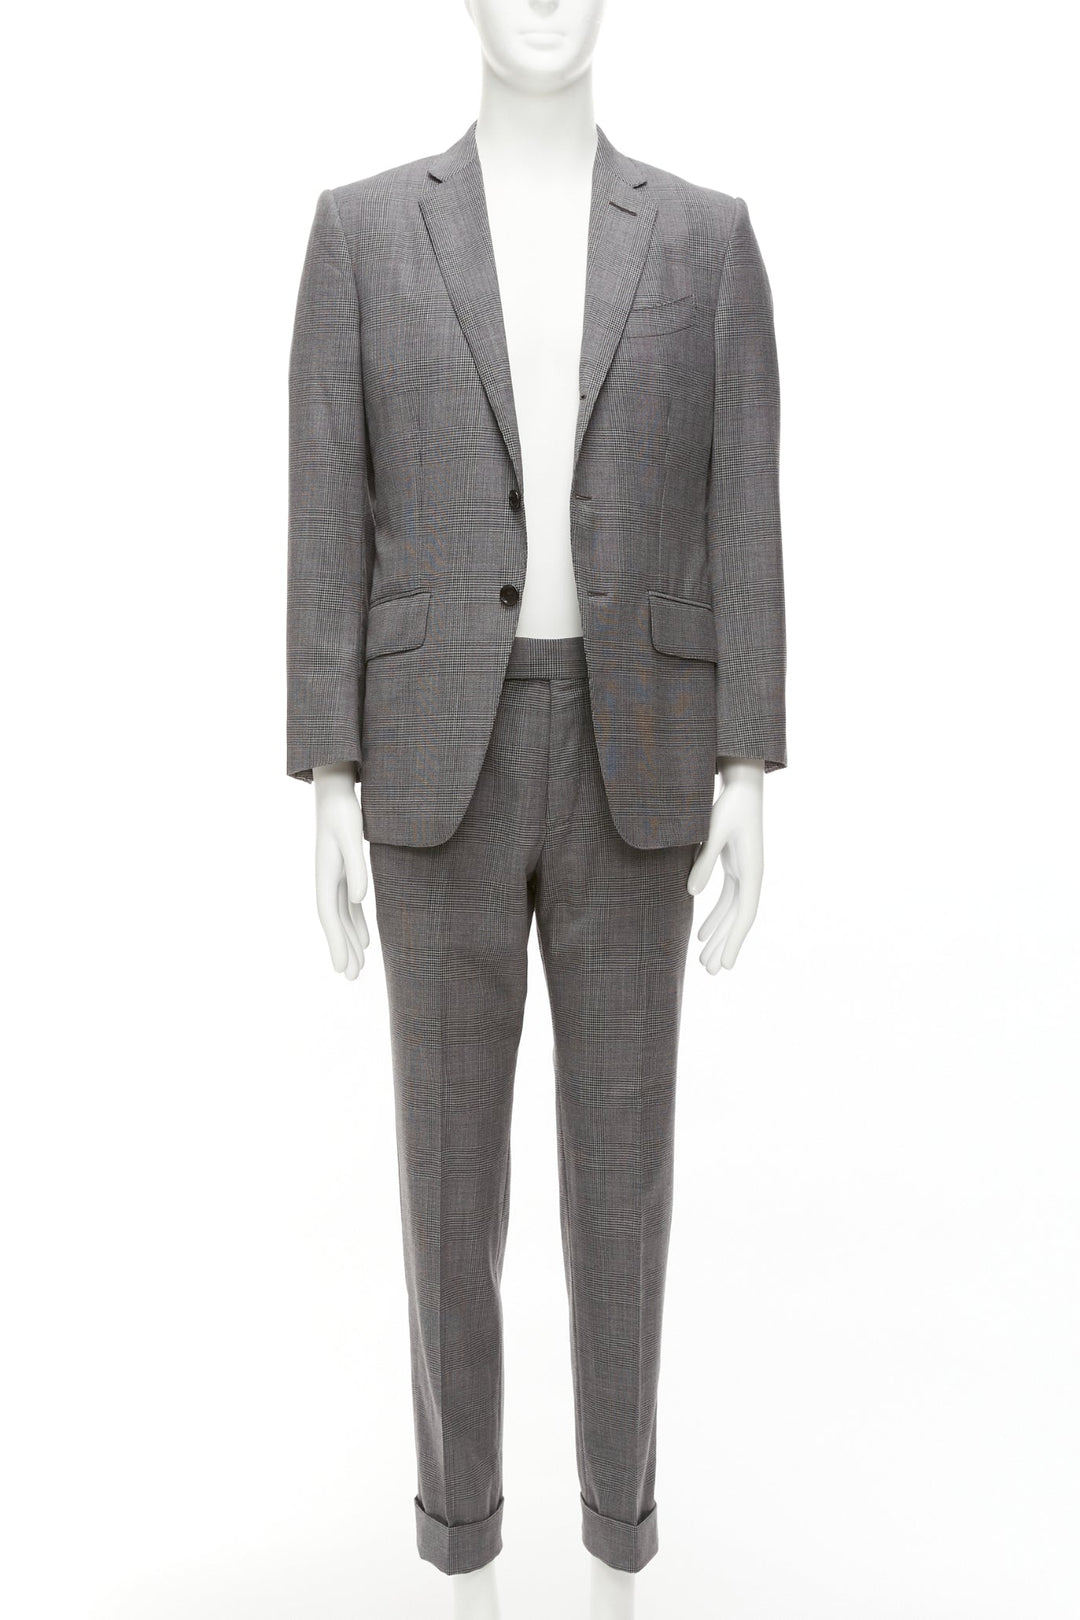 TOM FORD O'Connor grey houndstooth wool blend blazer pants suit set IT46 S